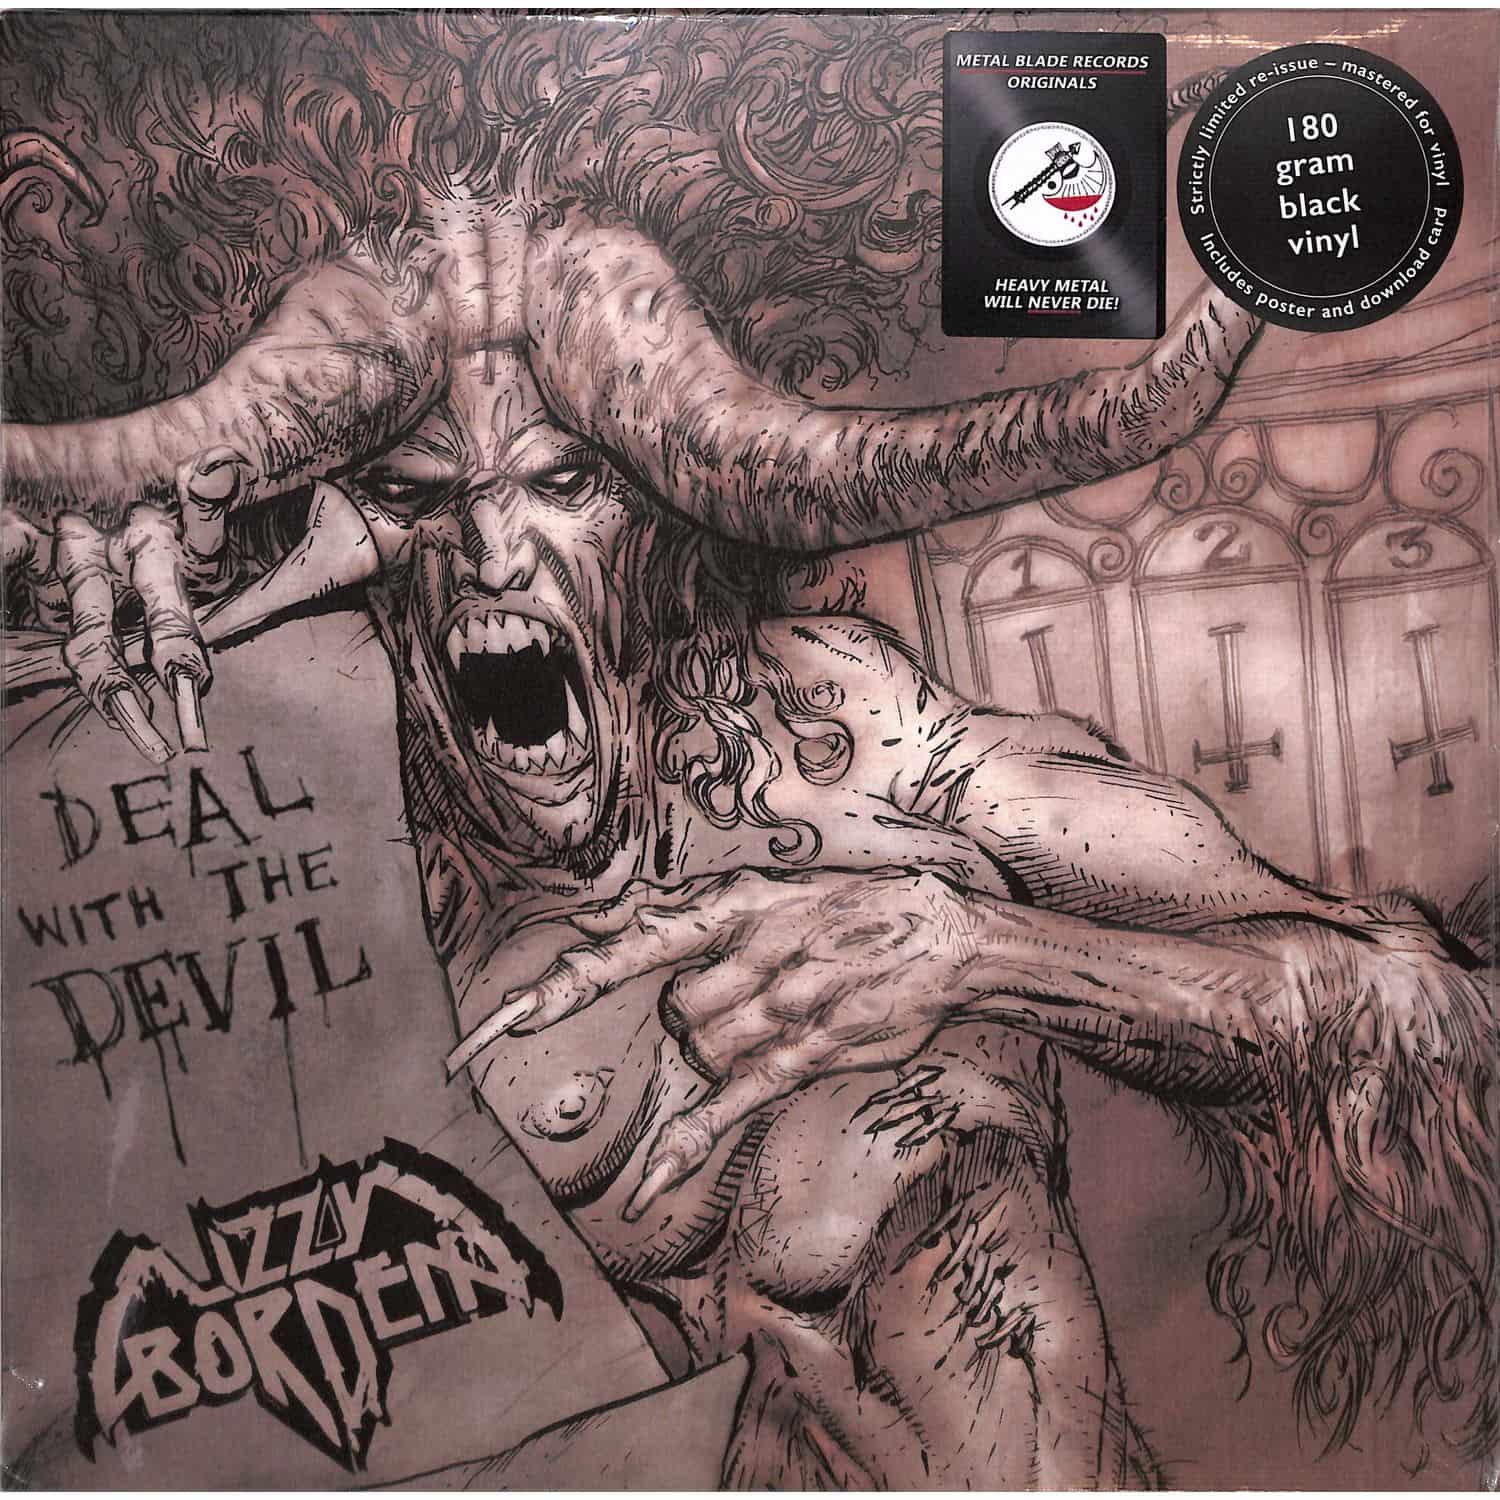 Lizzy Borden - DEAL WITH THE DEVIL 